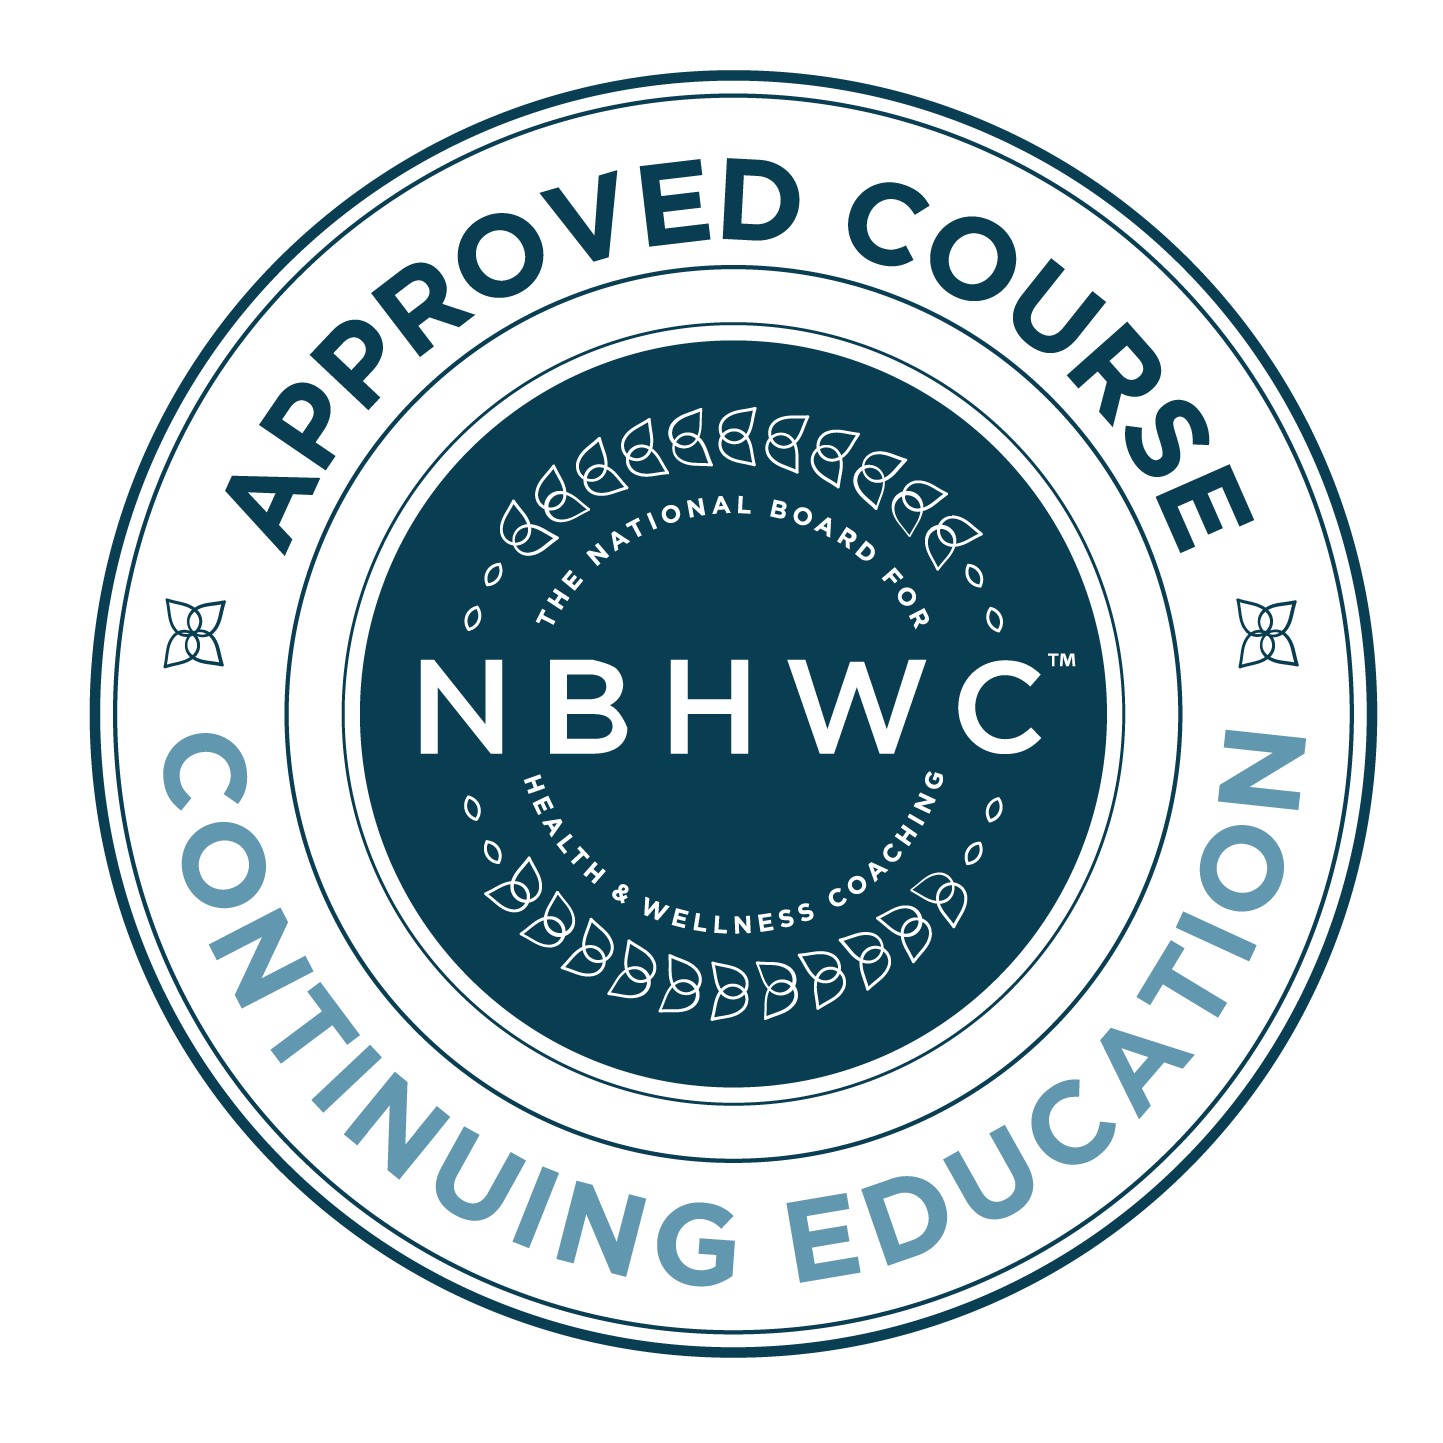 NBHWC Approved Course